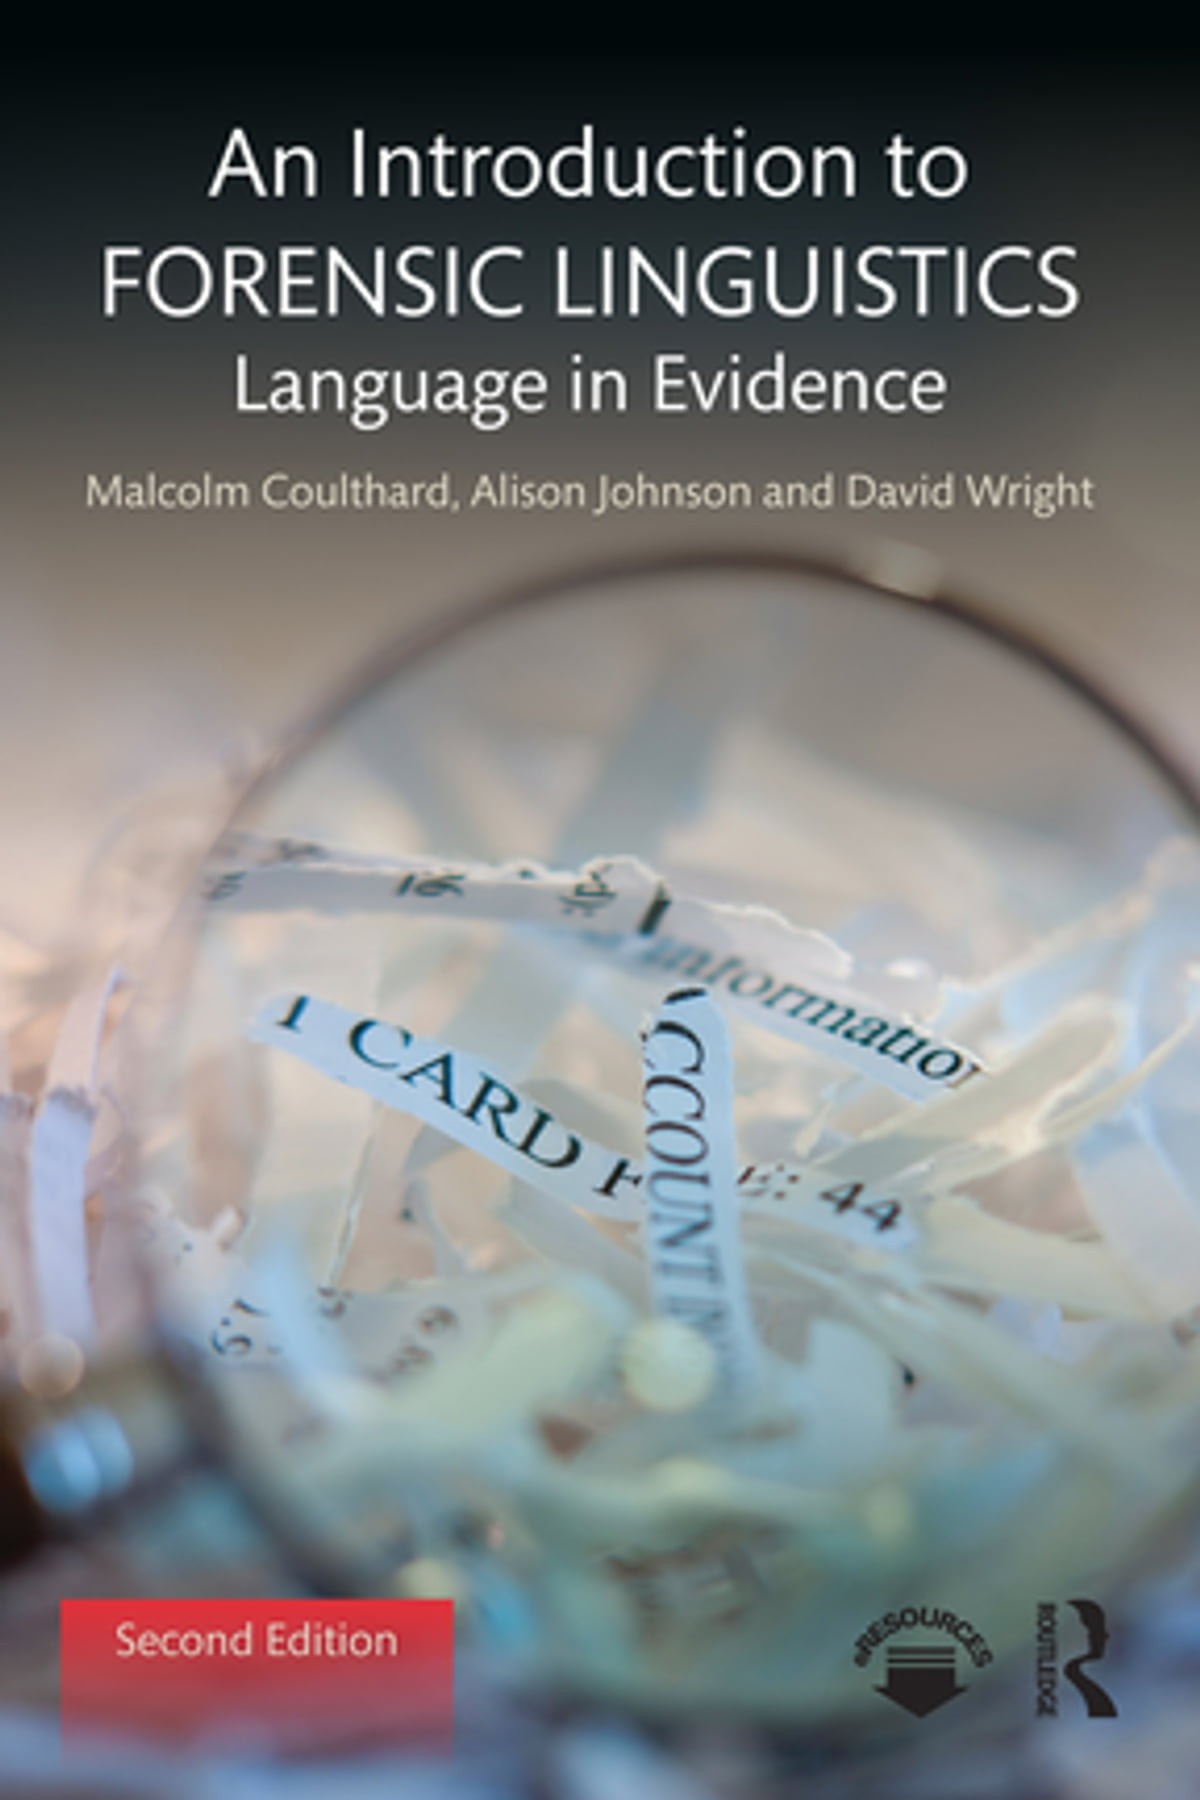 An Introduction to Forensic Linguistics: Language in Evidence